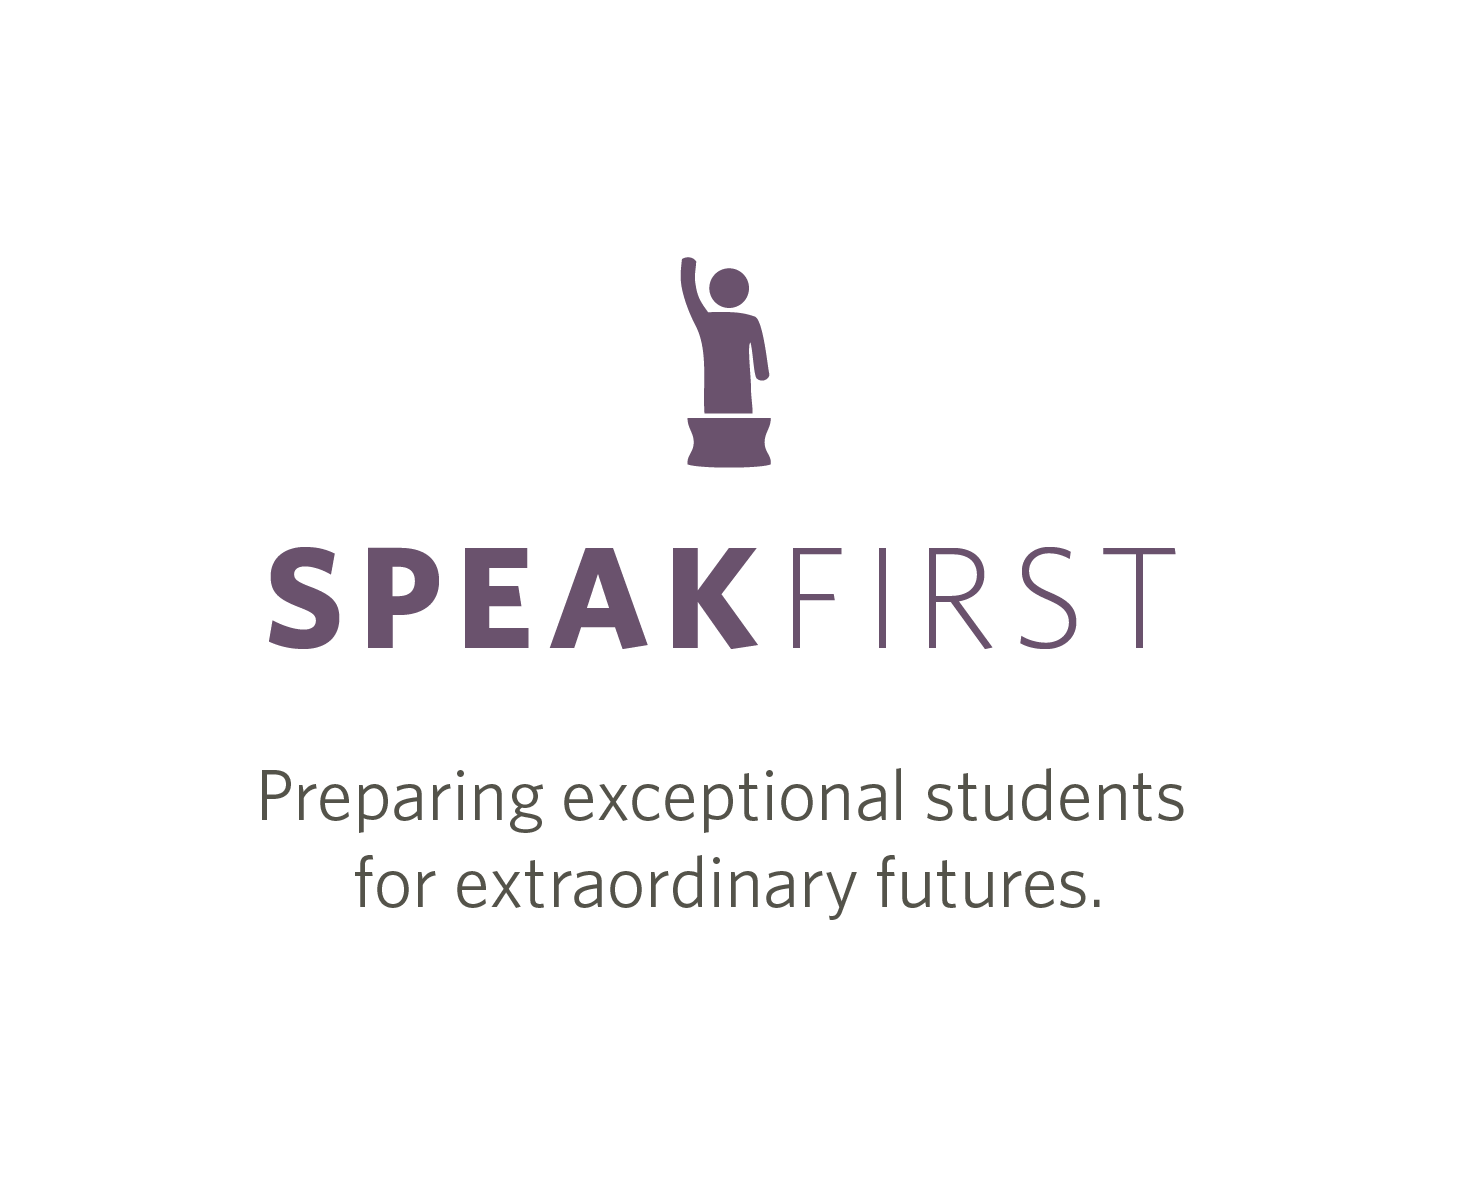 SpeakFirst - Preparing exceptional students for extraordinary futures